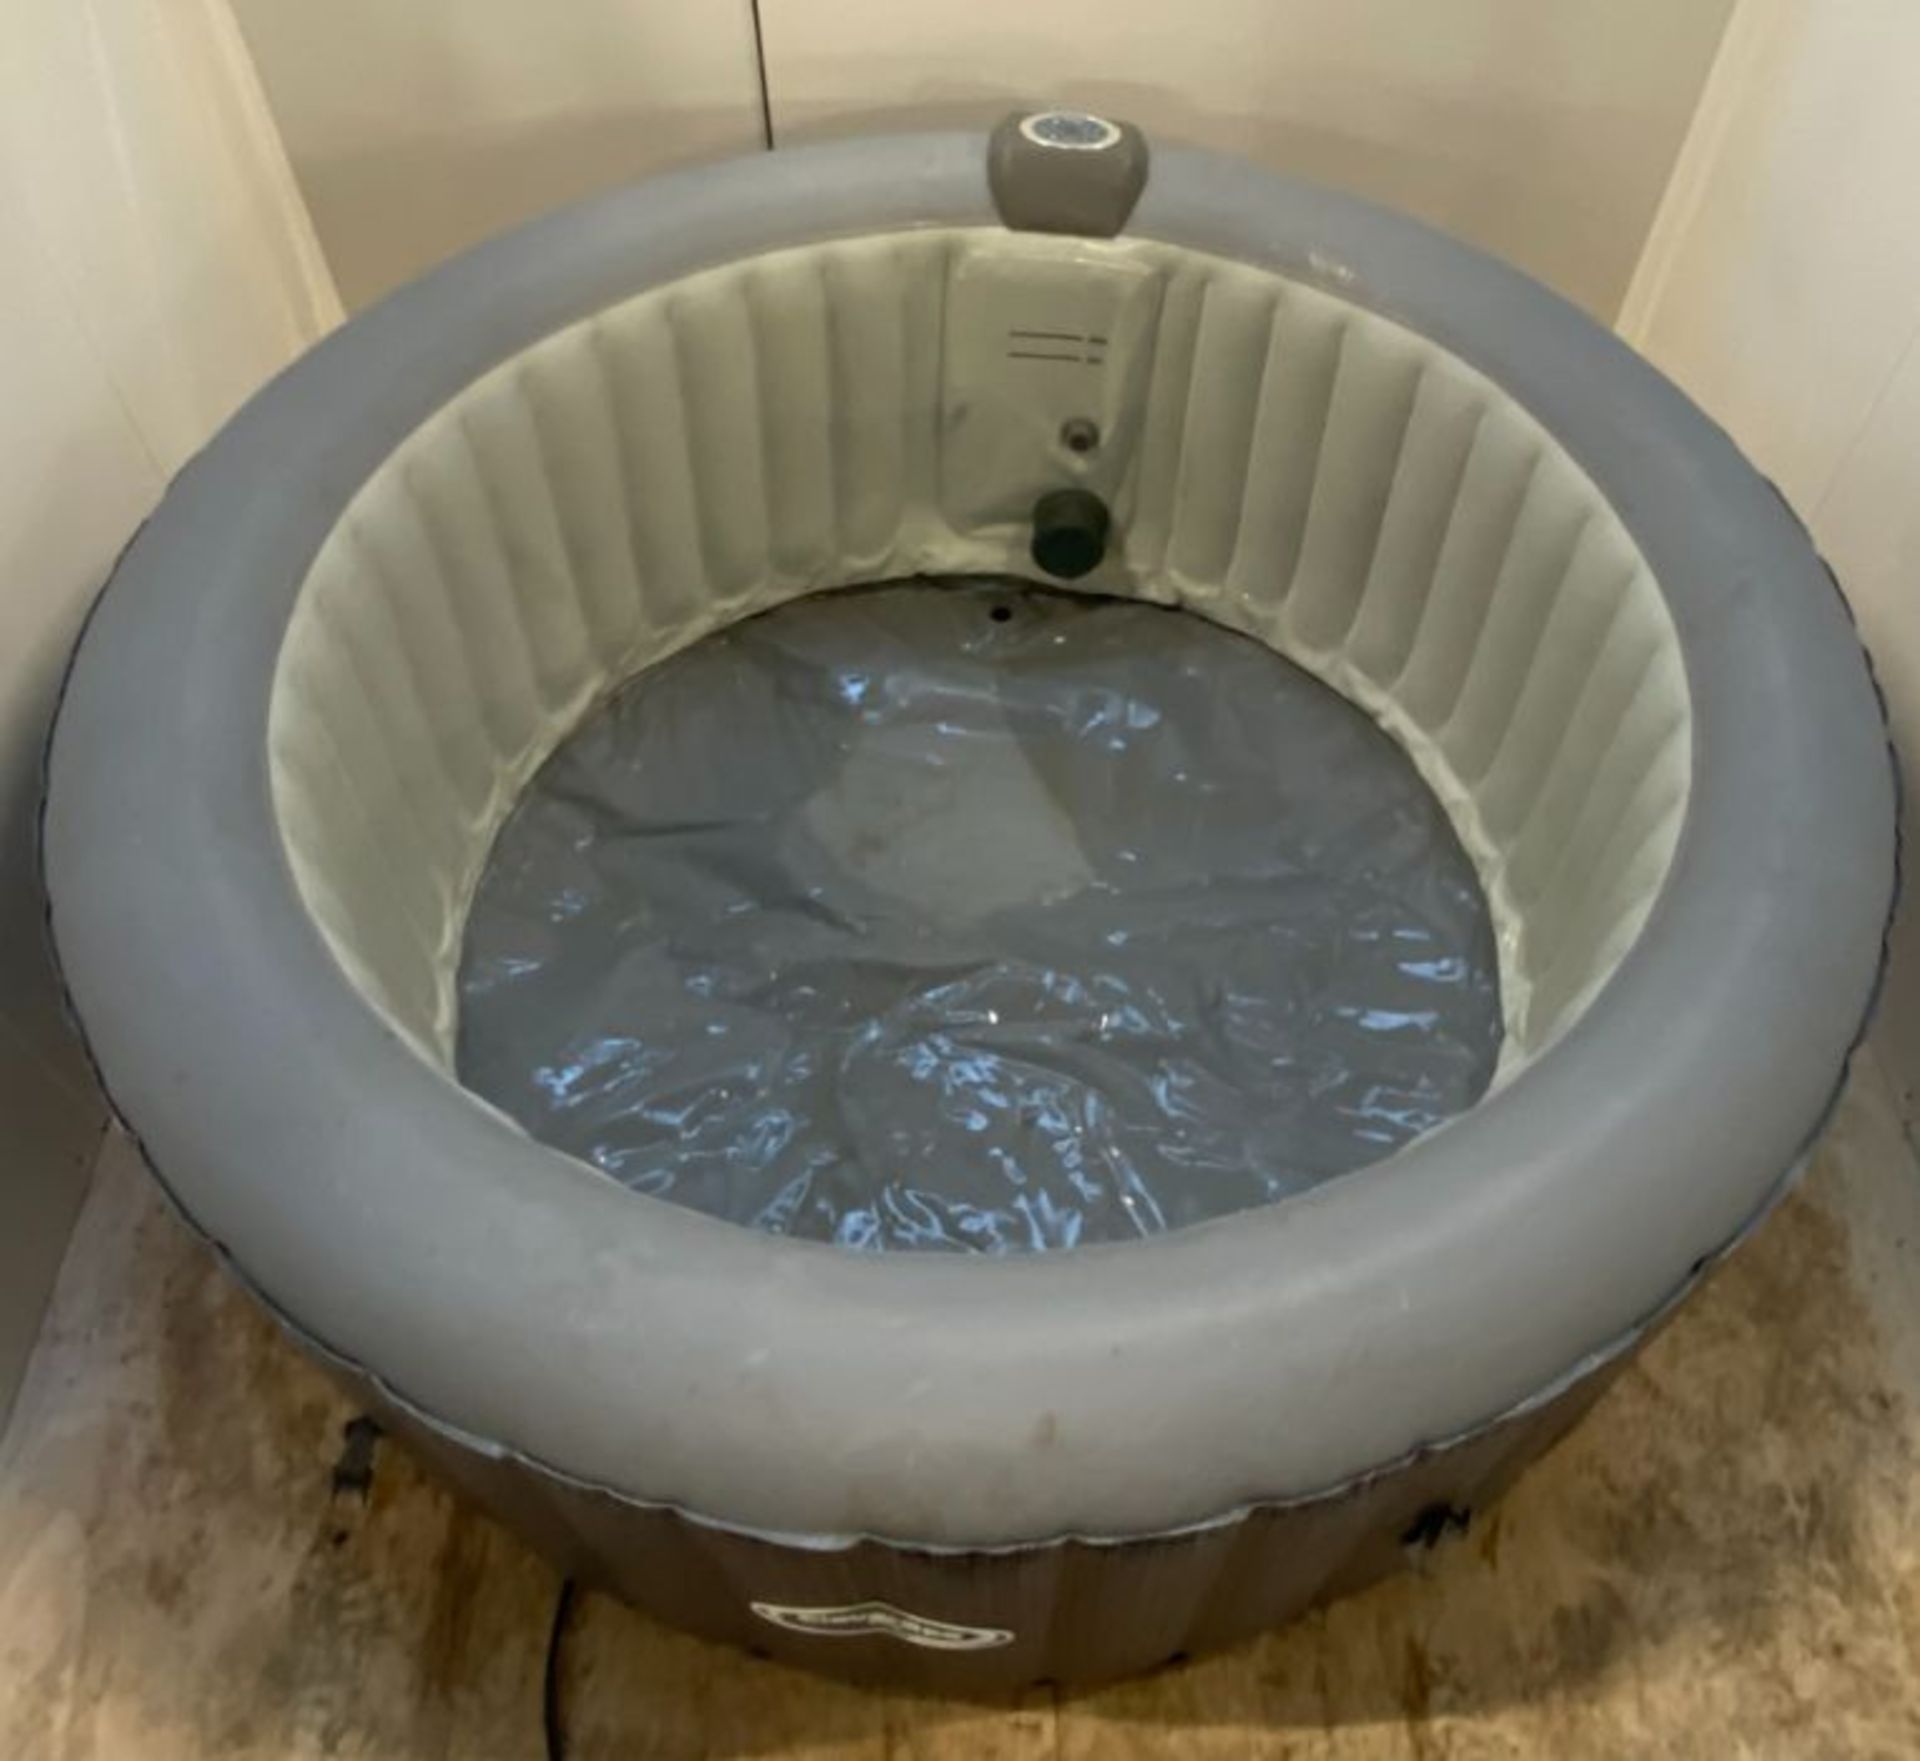 1 x CLEVERSPA MIA 4 PERSON HOT TUB - RRP £413.70 - Image 2 of 3